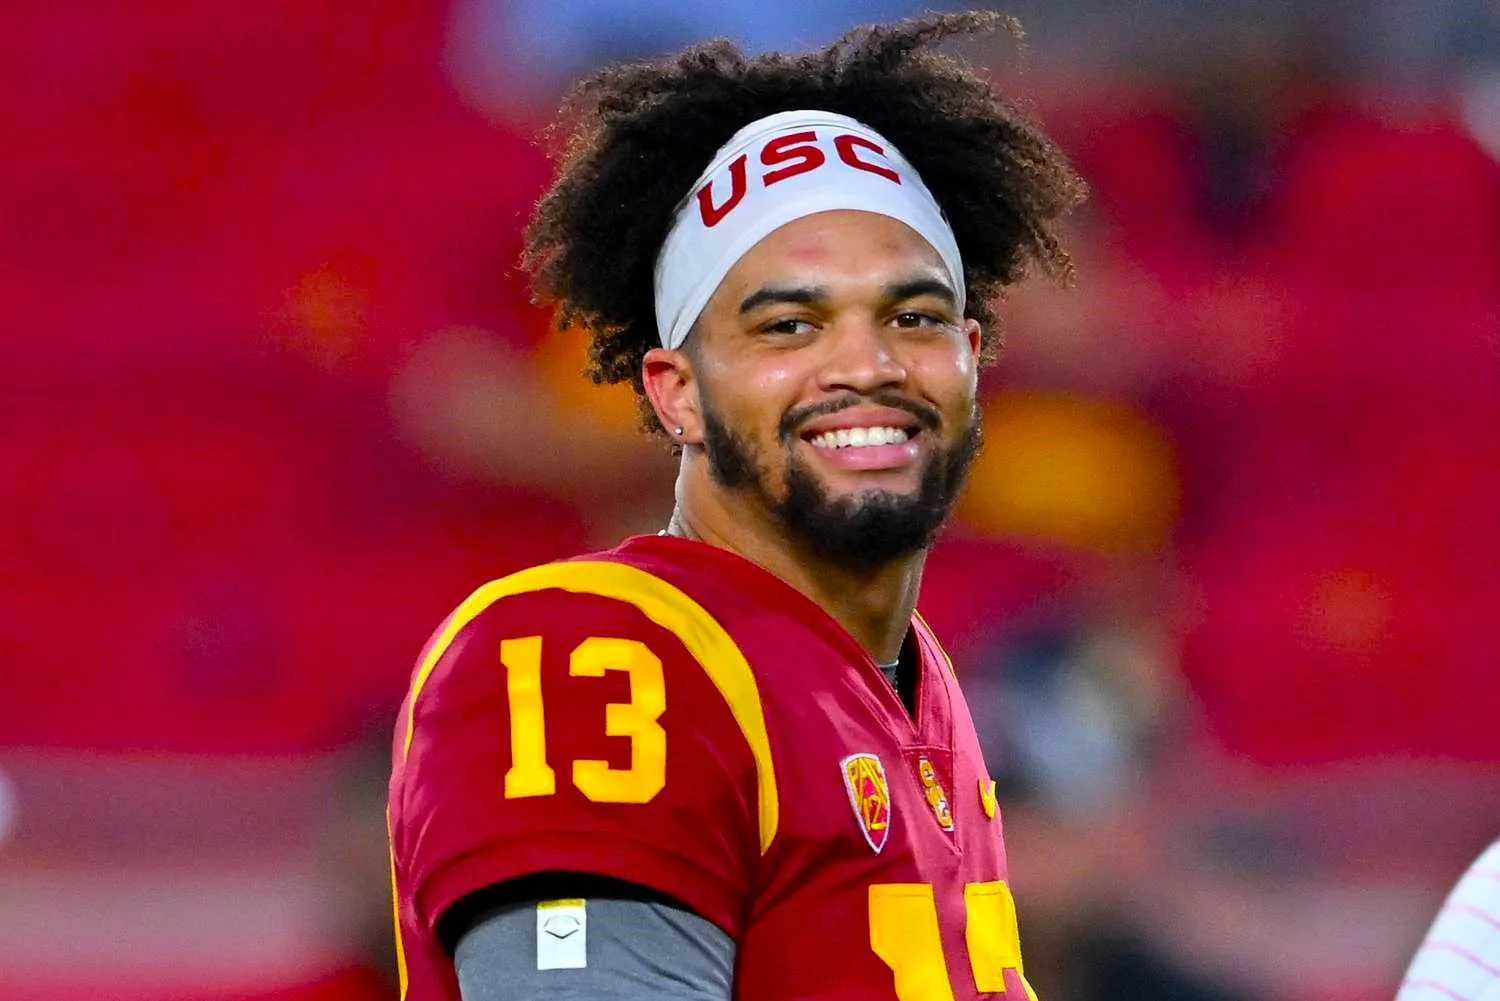 Is Southern Cal quarterback Caleb Williams, the likely first pick in April's NFL Draft, being babied, protected, by a certain section of the media? Outkick.com's David Hookstead believes so. (Photo courtesy of PEOPLE.COM)